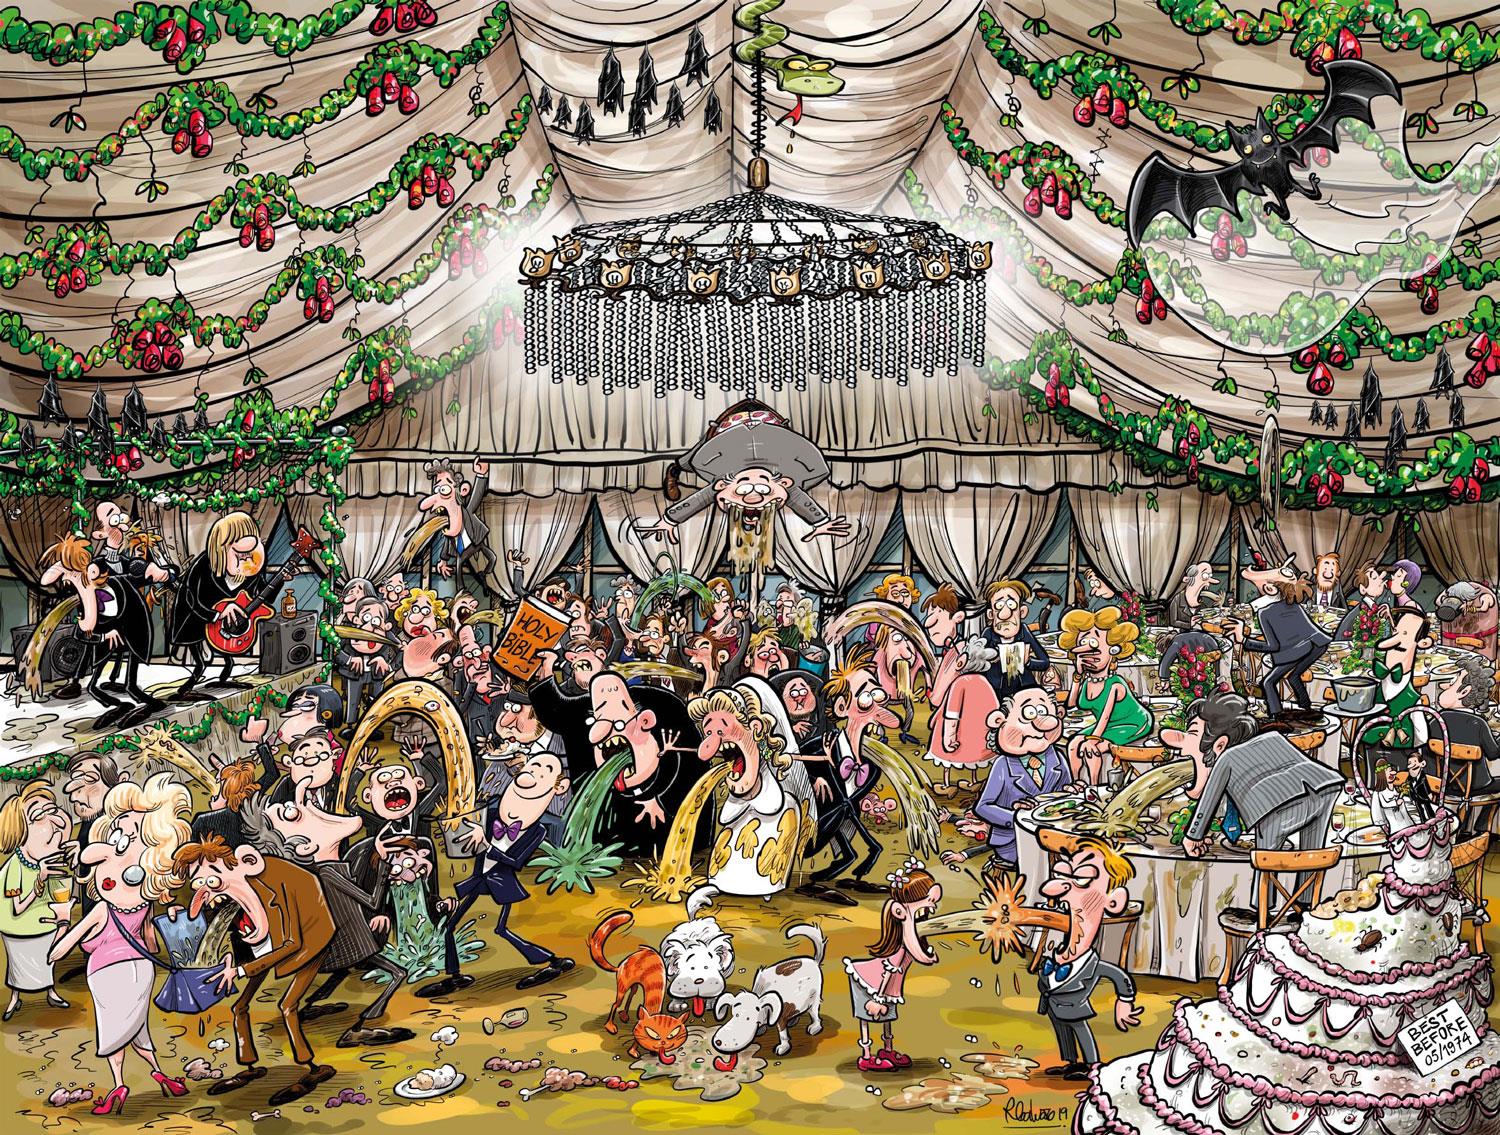 Chaos at the Wedding Reception Jigsaw Puzzle- Chaos no.16 (1000 Pieces)